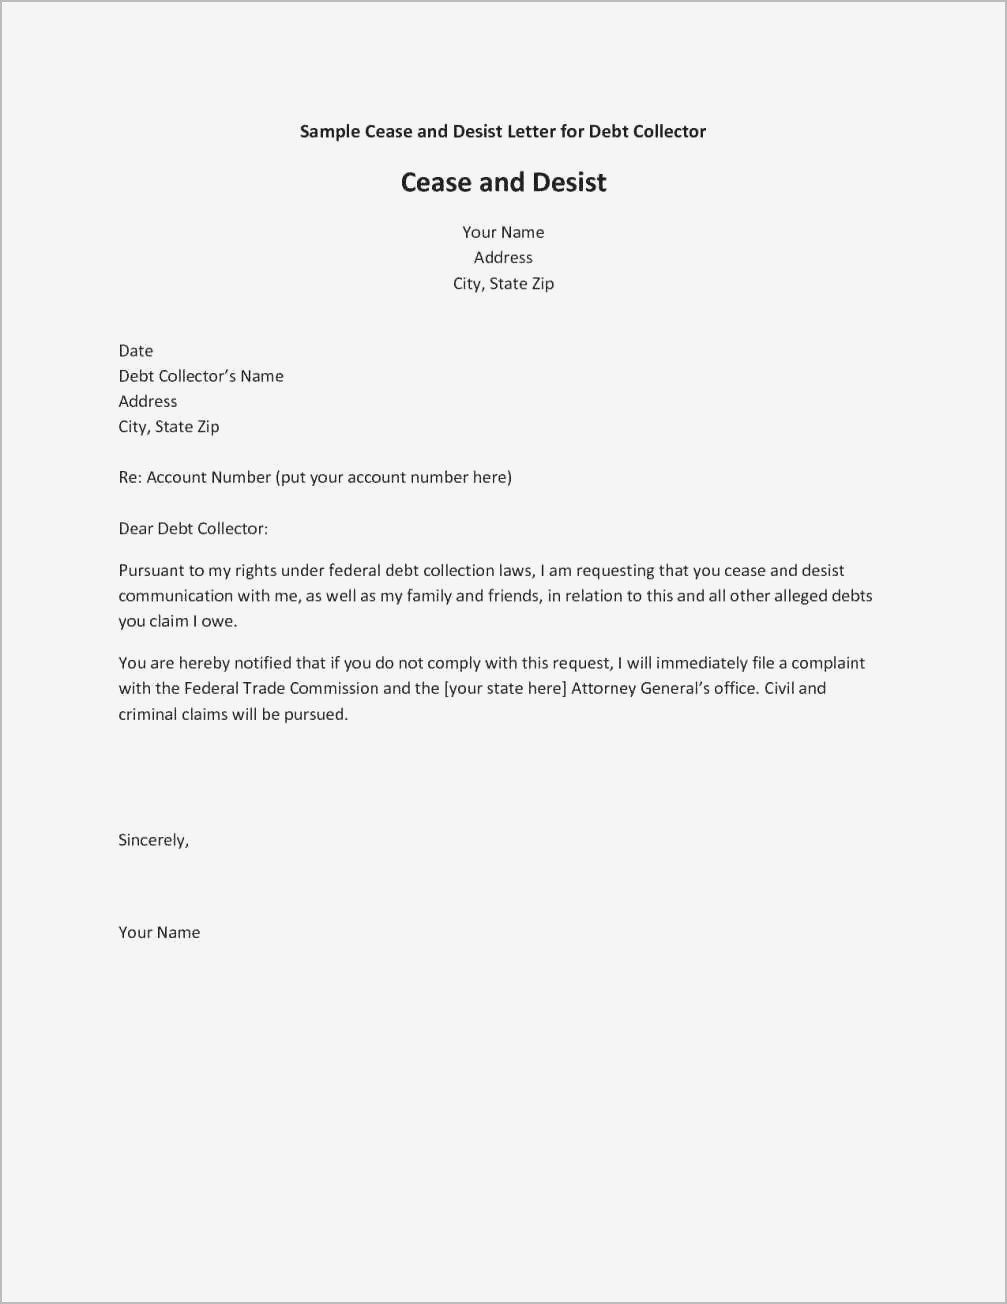 Trademark Cease and Desist Letter Template - Inspirational Cease and Desist Letter Example Your Template